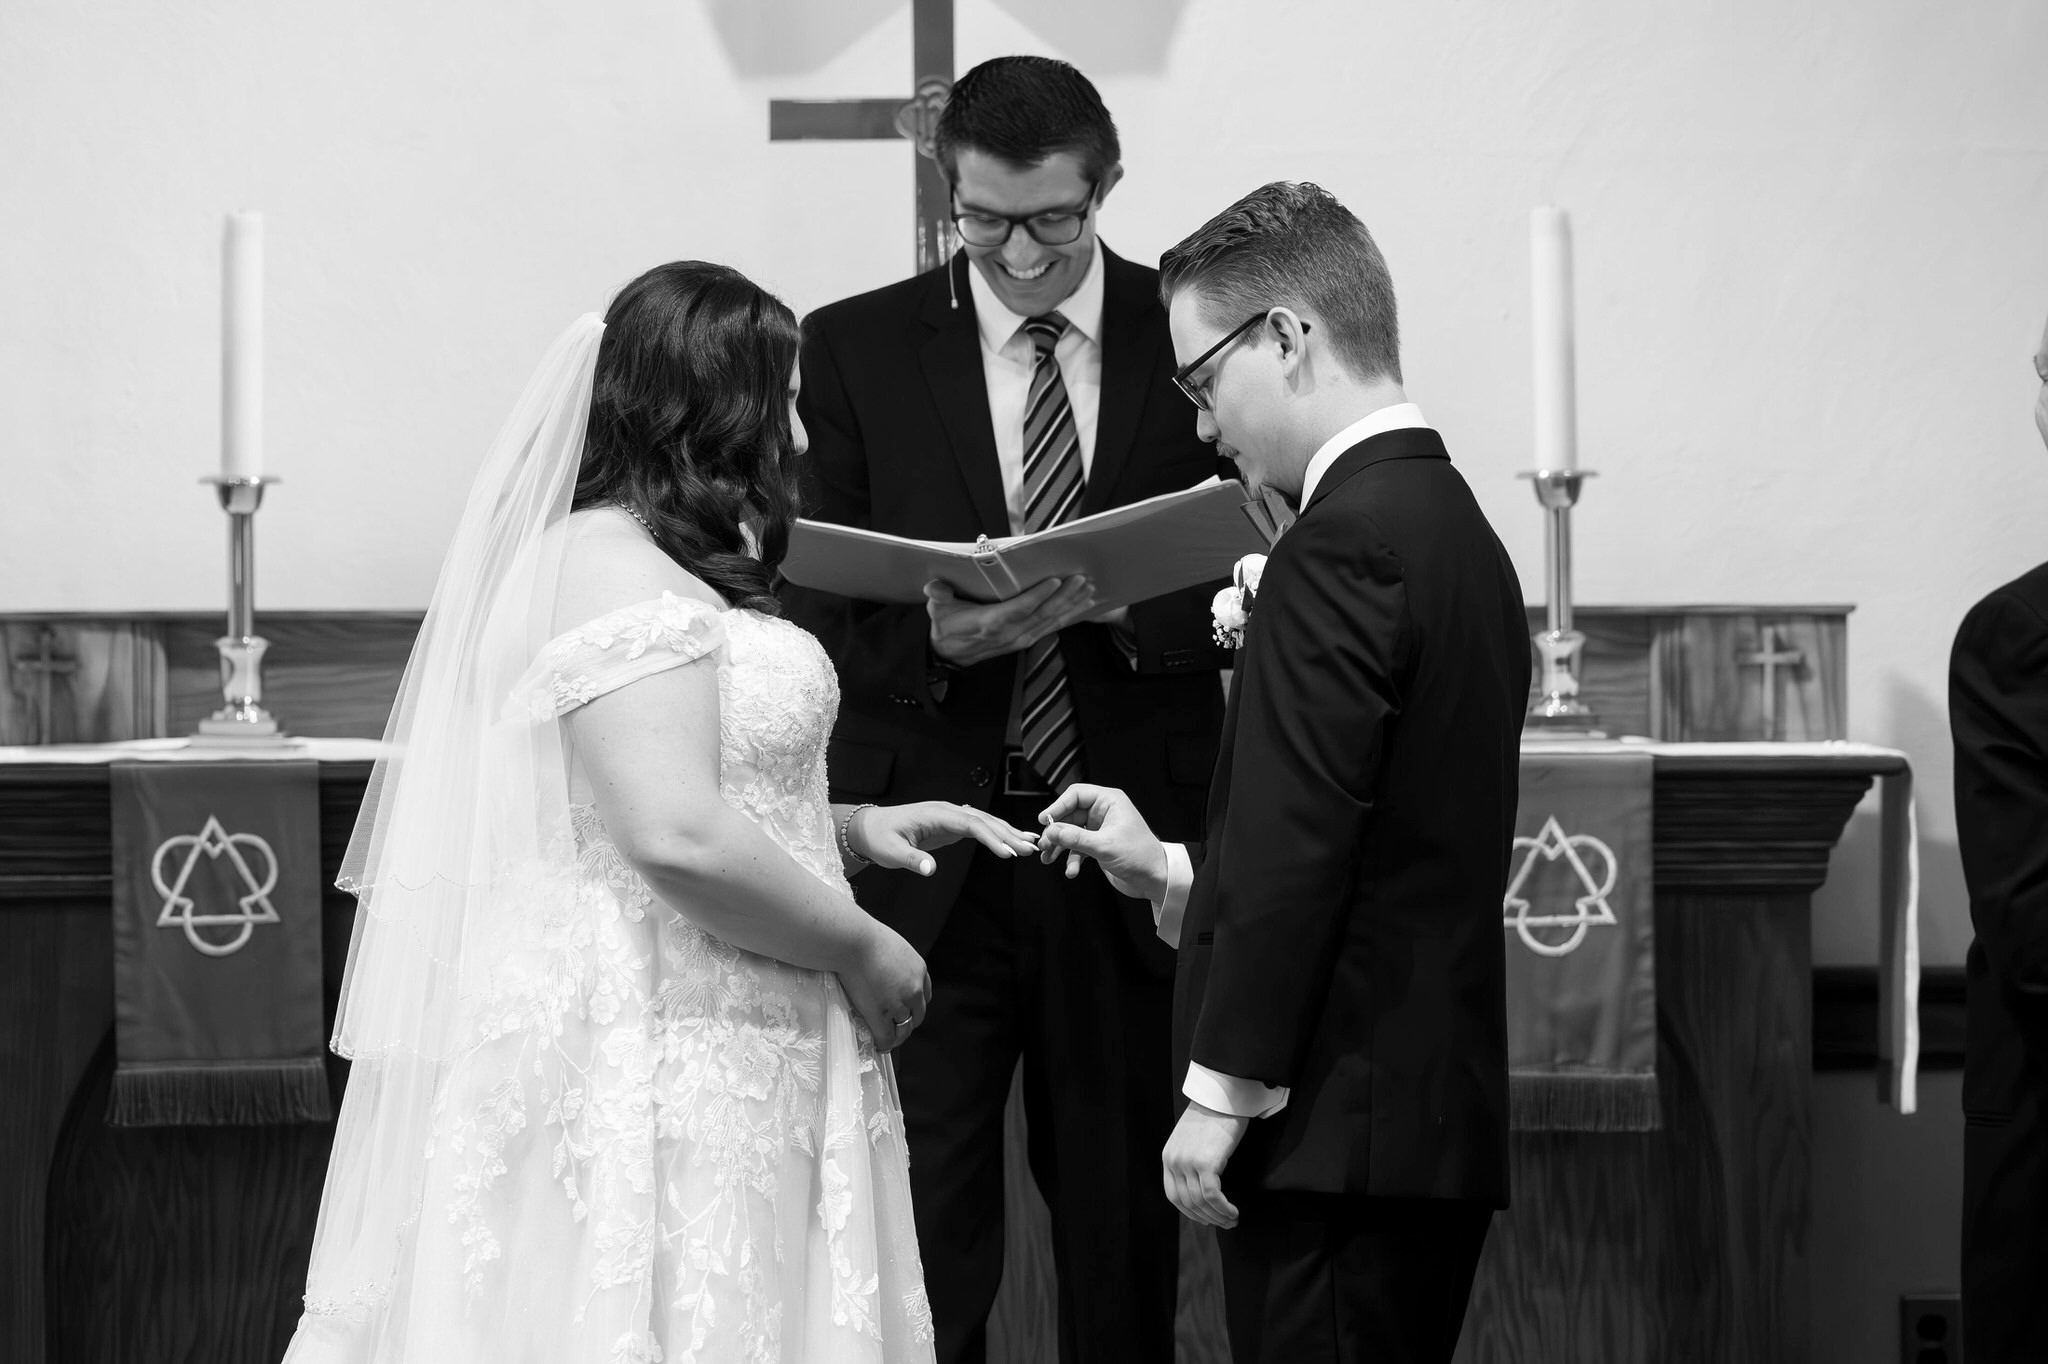 The bride and groom exchange rings at the altar on their wedding day at Immanuel Lutheran Church in Macomb, MI. 